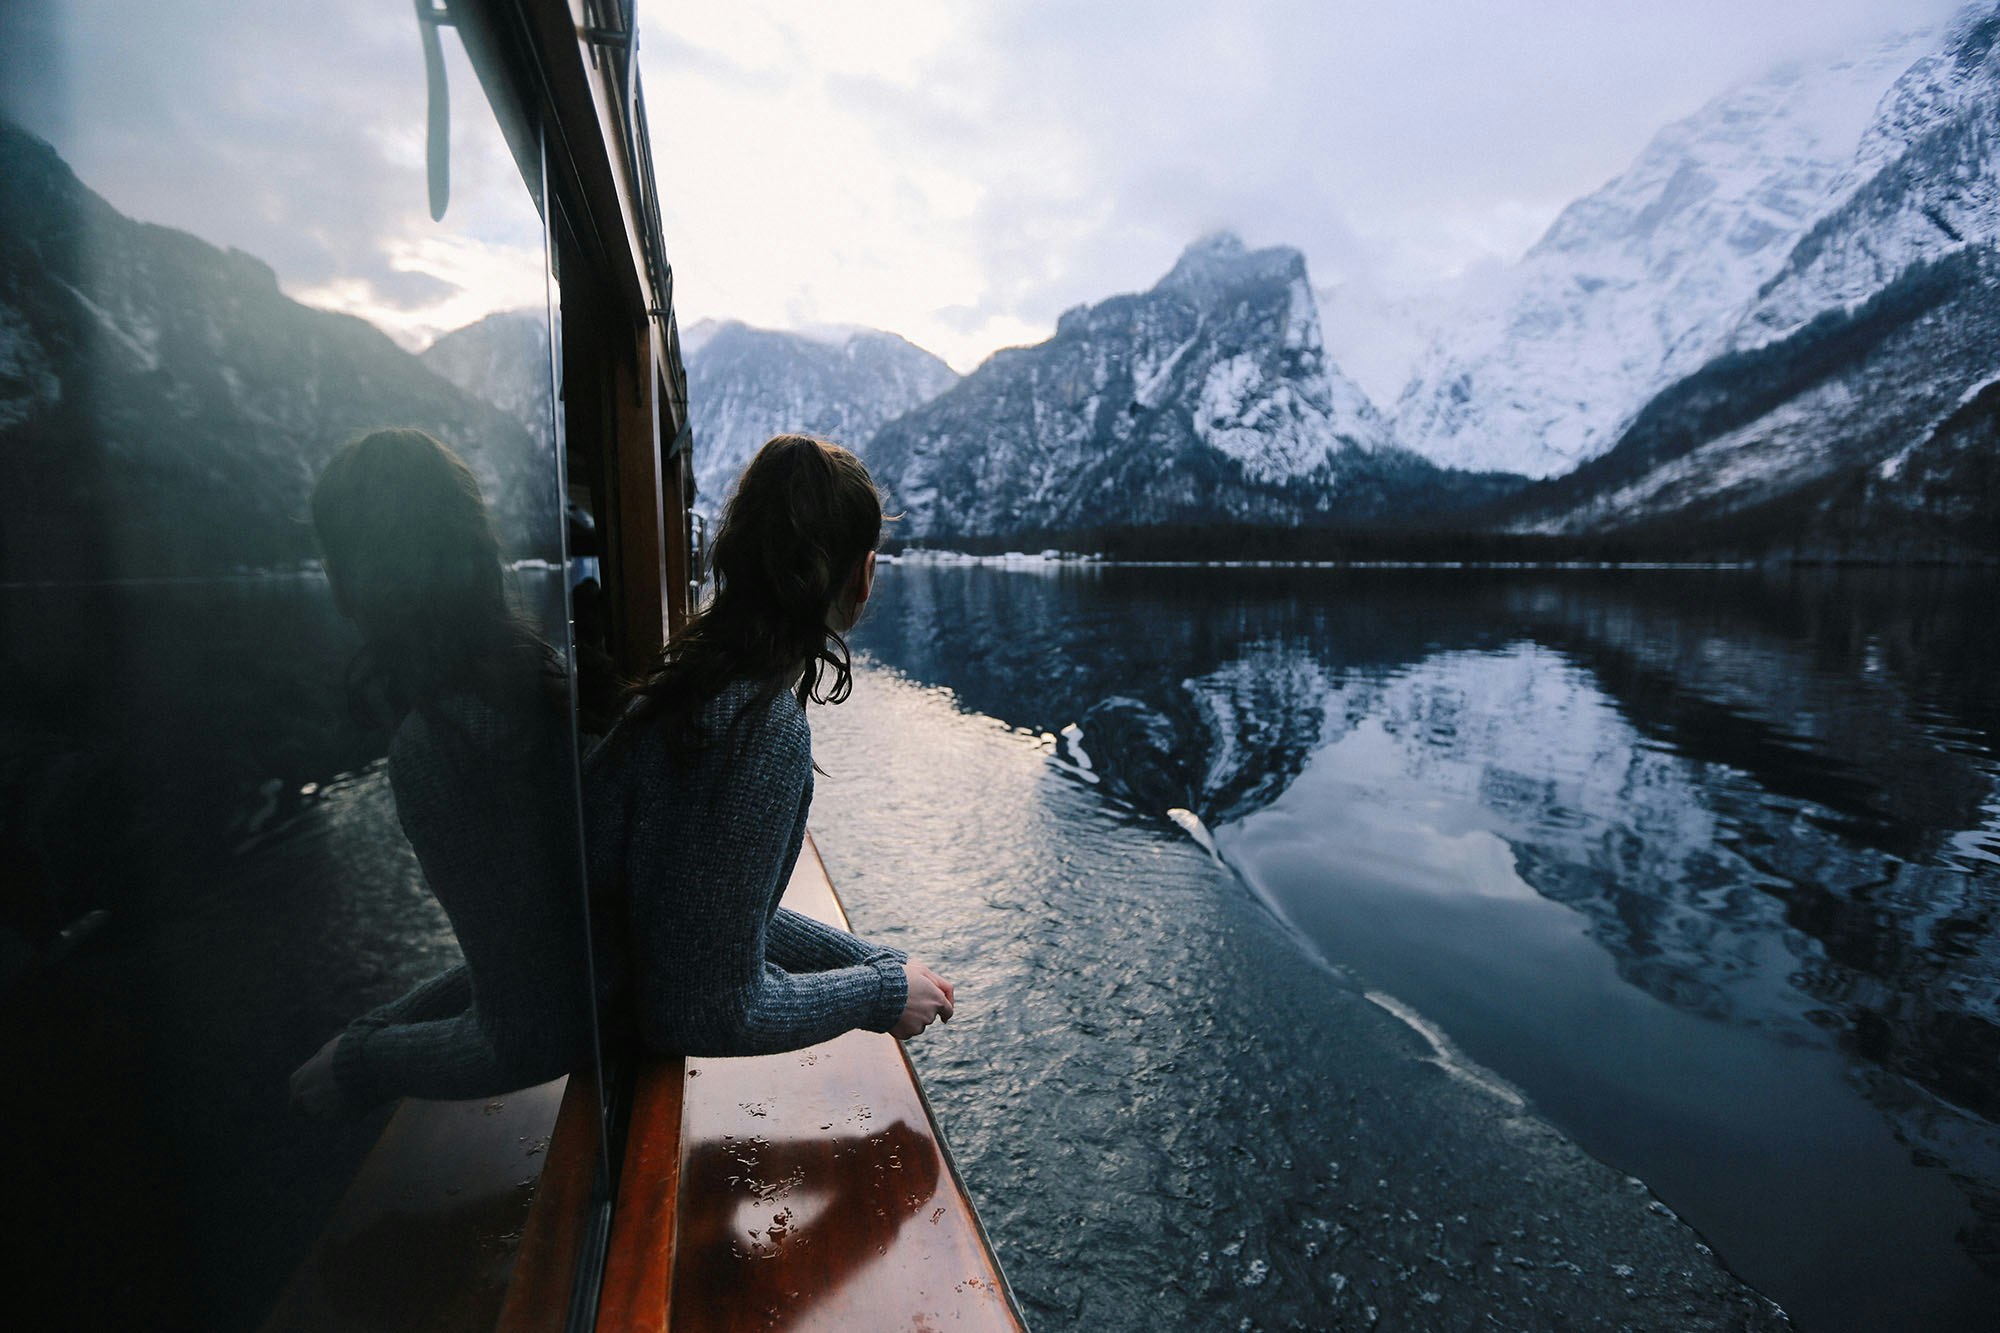 A woman leans out from the window of a small boat cruising through dark blue waters with snow-covered mountains in the distance.